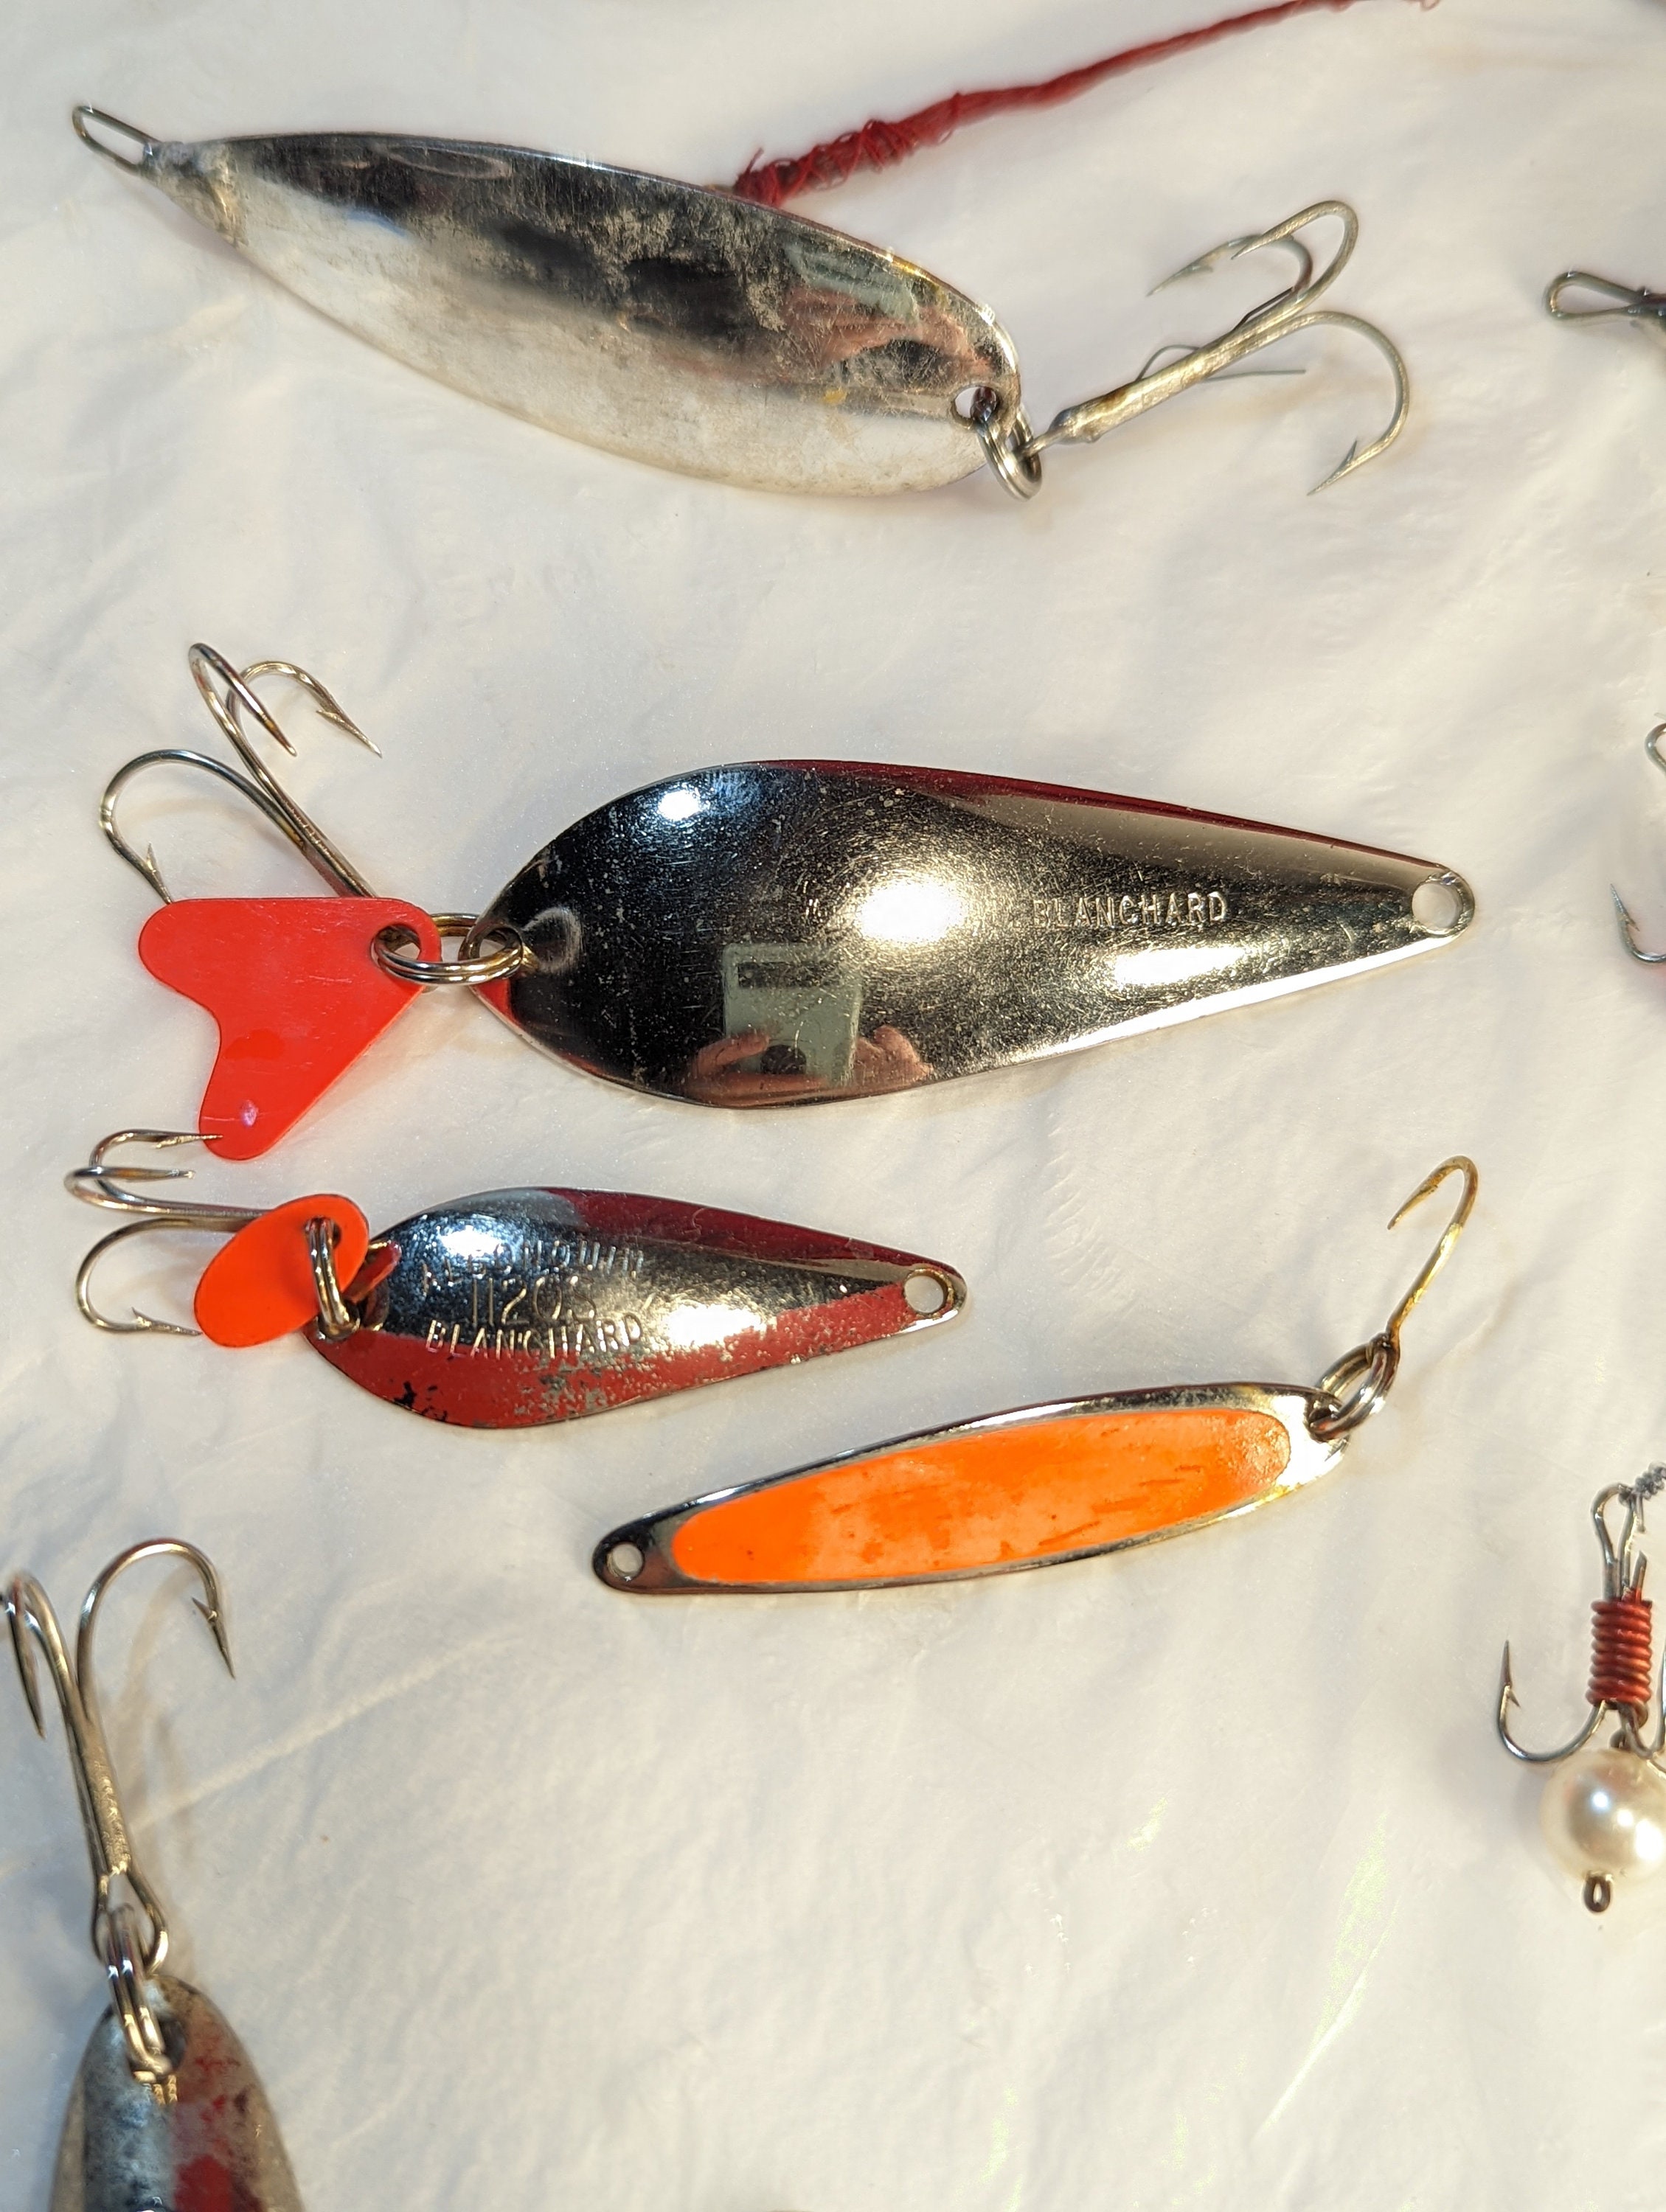  West Coast Vintage Salmon Lures Vol. 1 - Metal Spoons and  Attractors With Value Guide: 9780989336673: Russell R Christianson: Libros